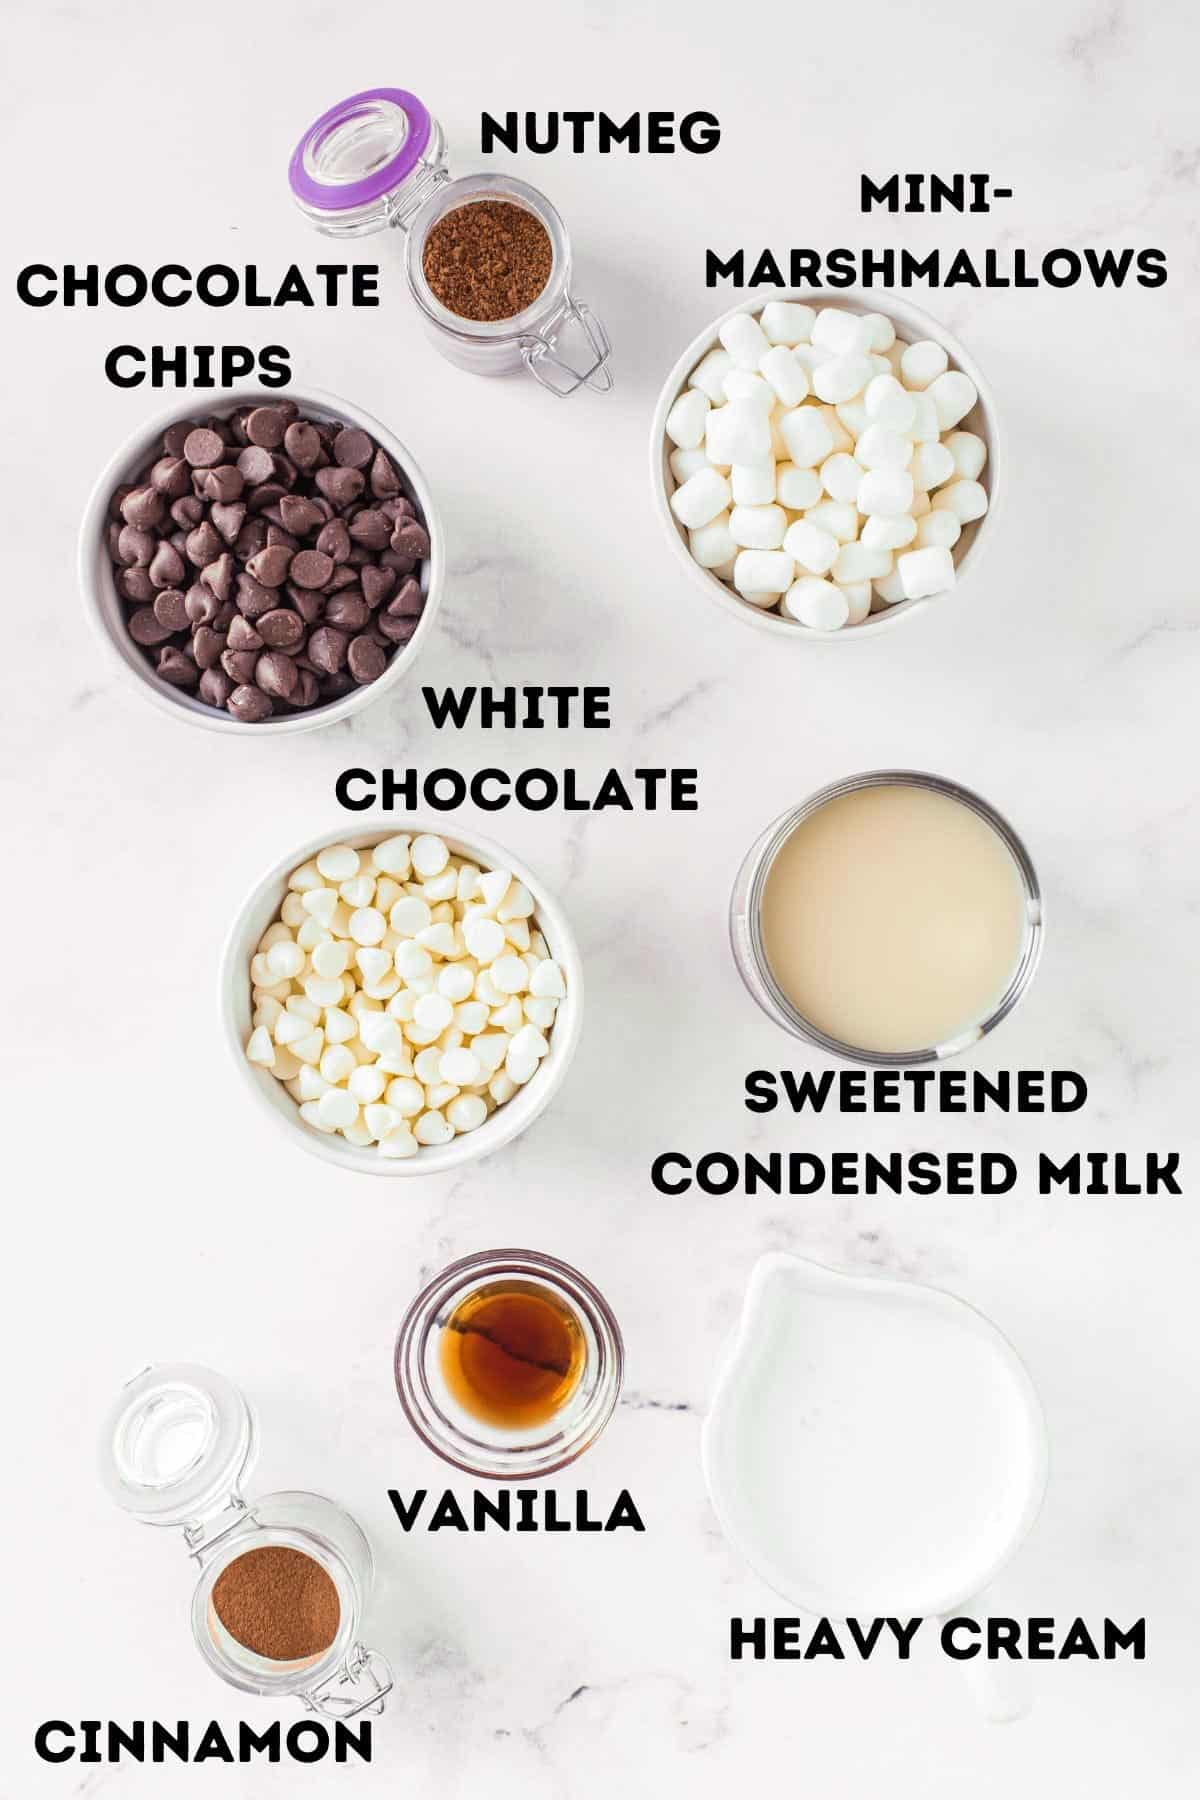 A cup of mini marshmallows and chocolate chips and other ingredients.